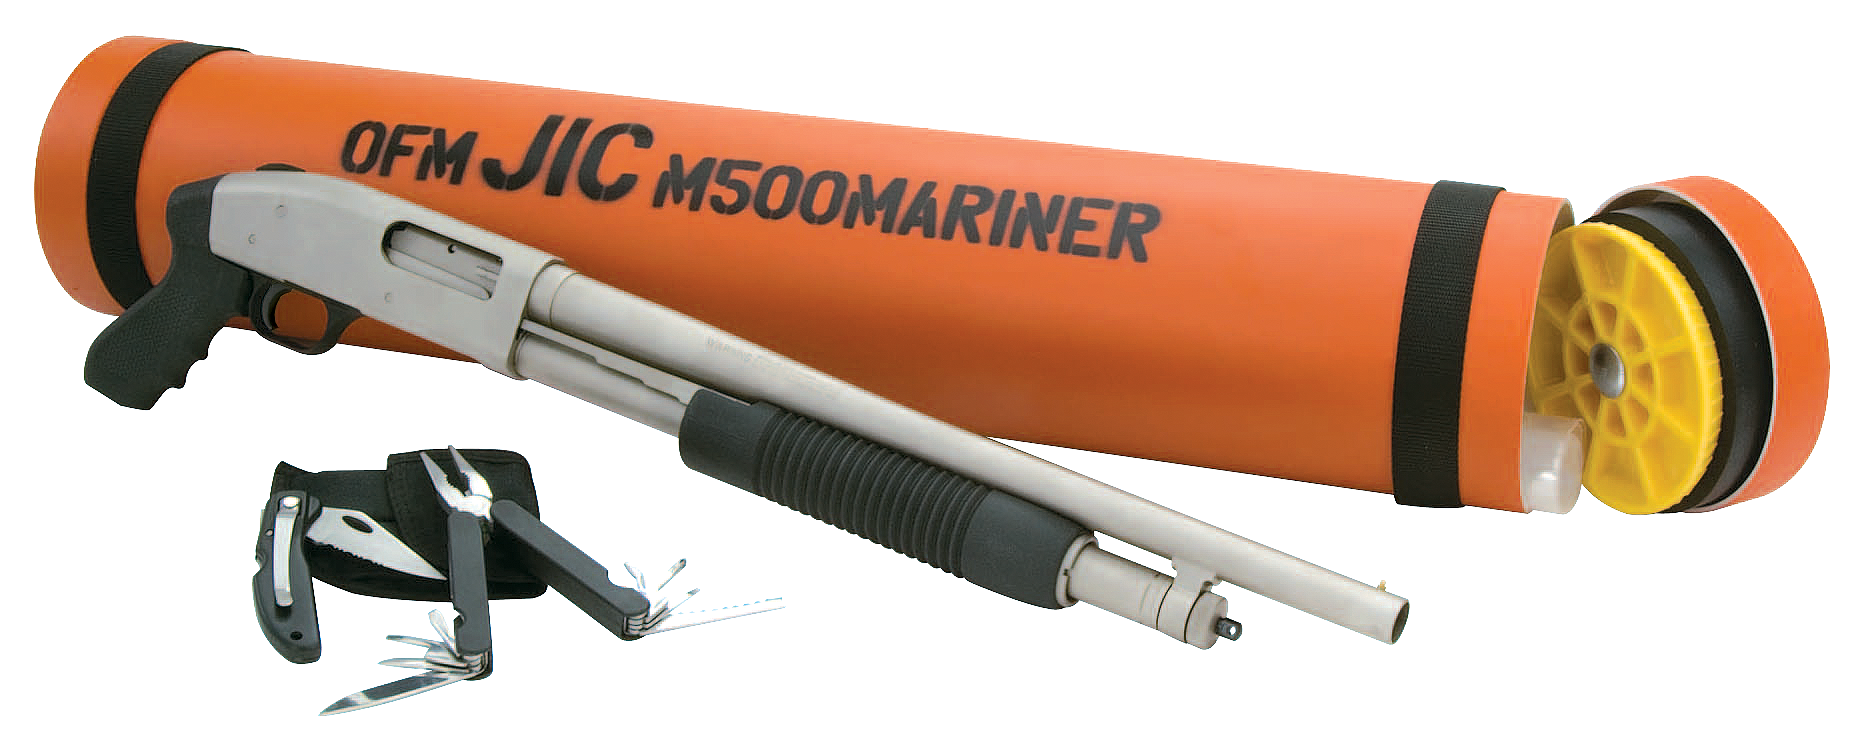 a mossberg 500 mariner shotgun with a water resistant tube